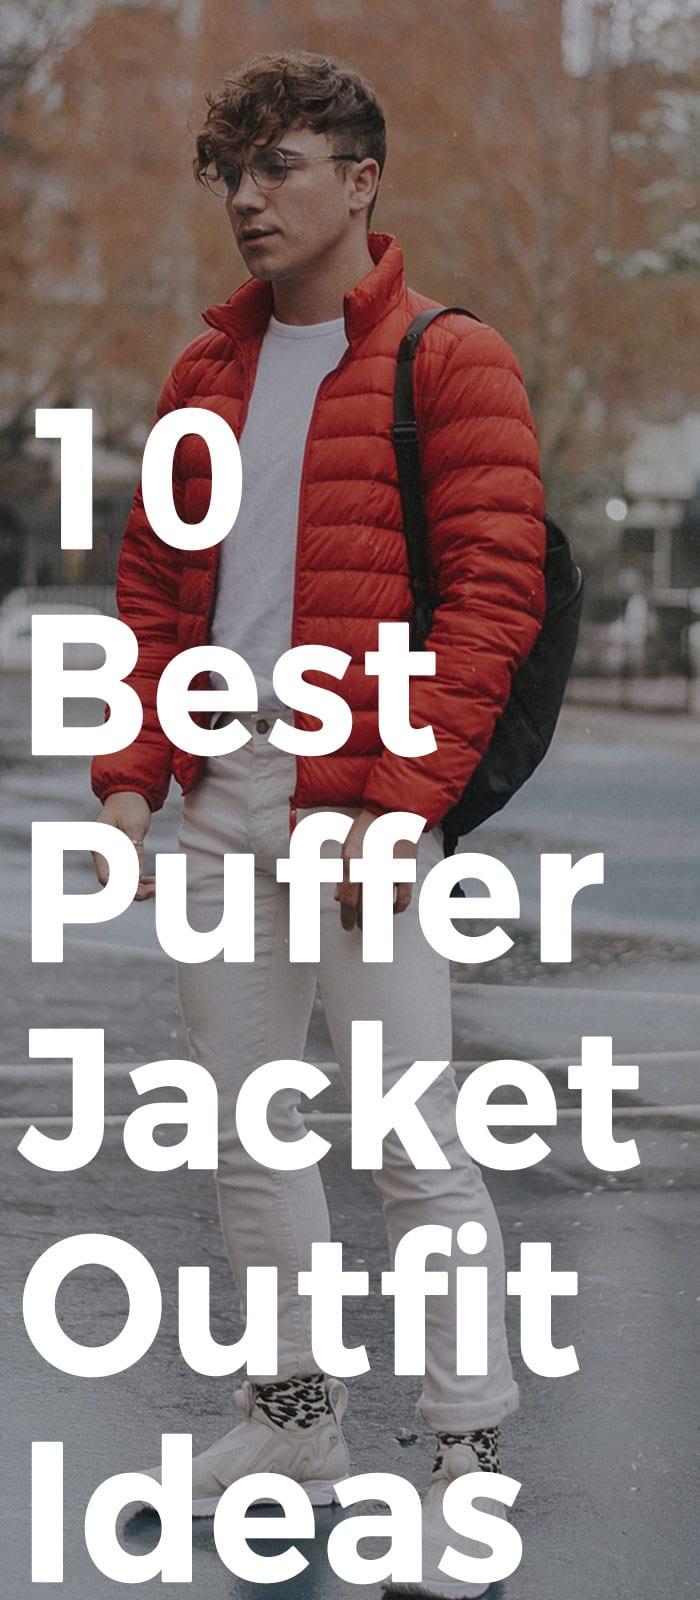 10 Best Puffer Jacket Outfit Ideas